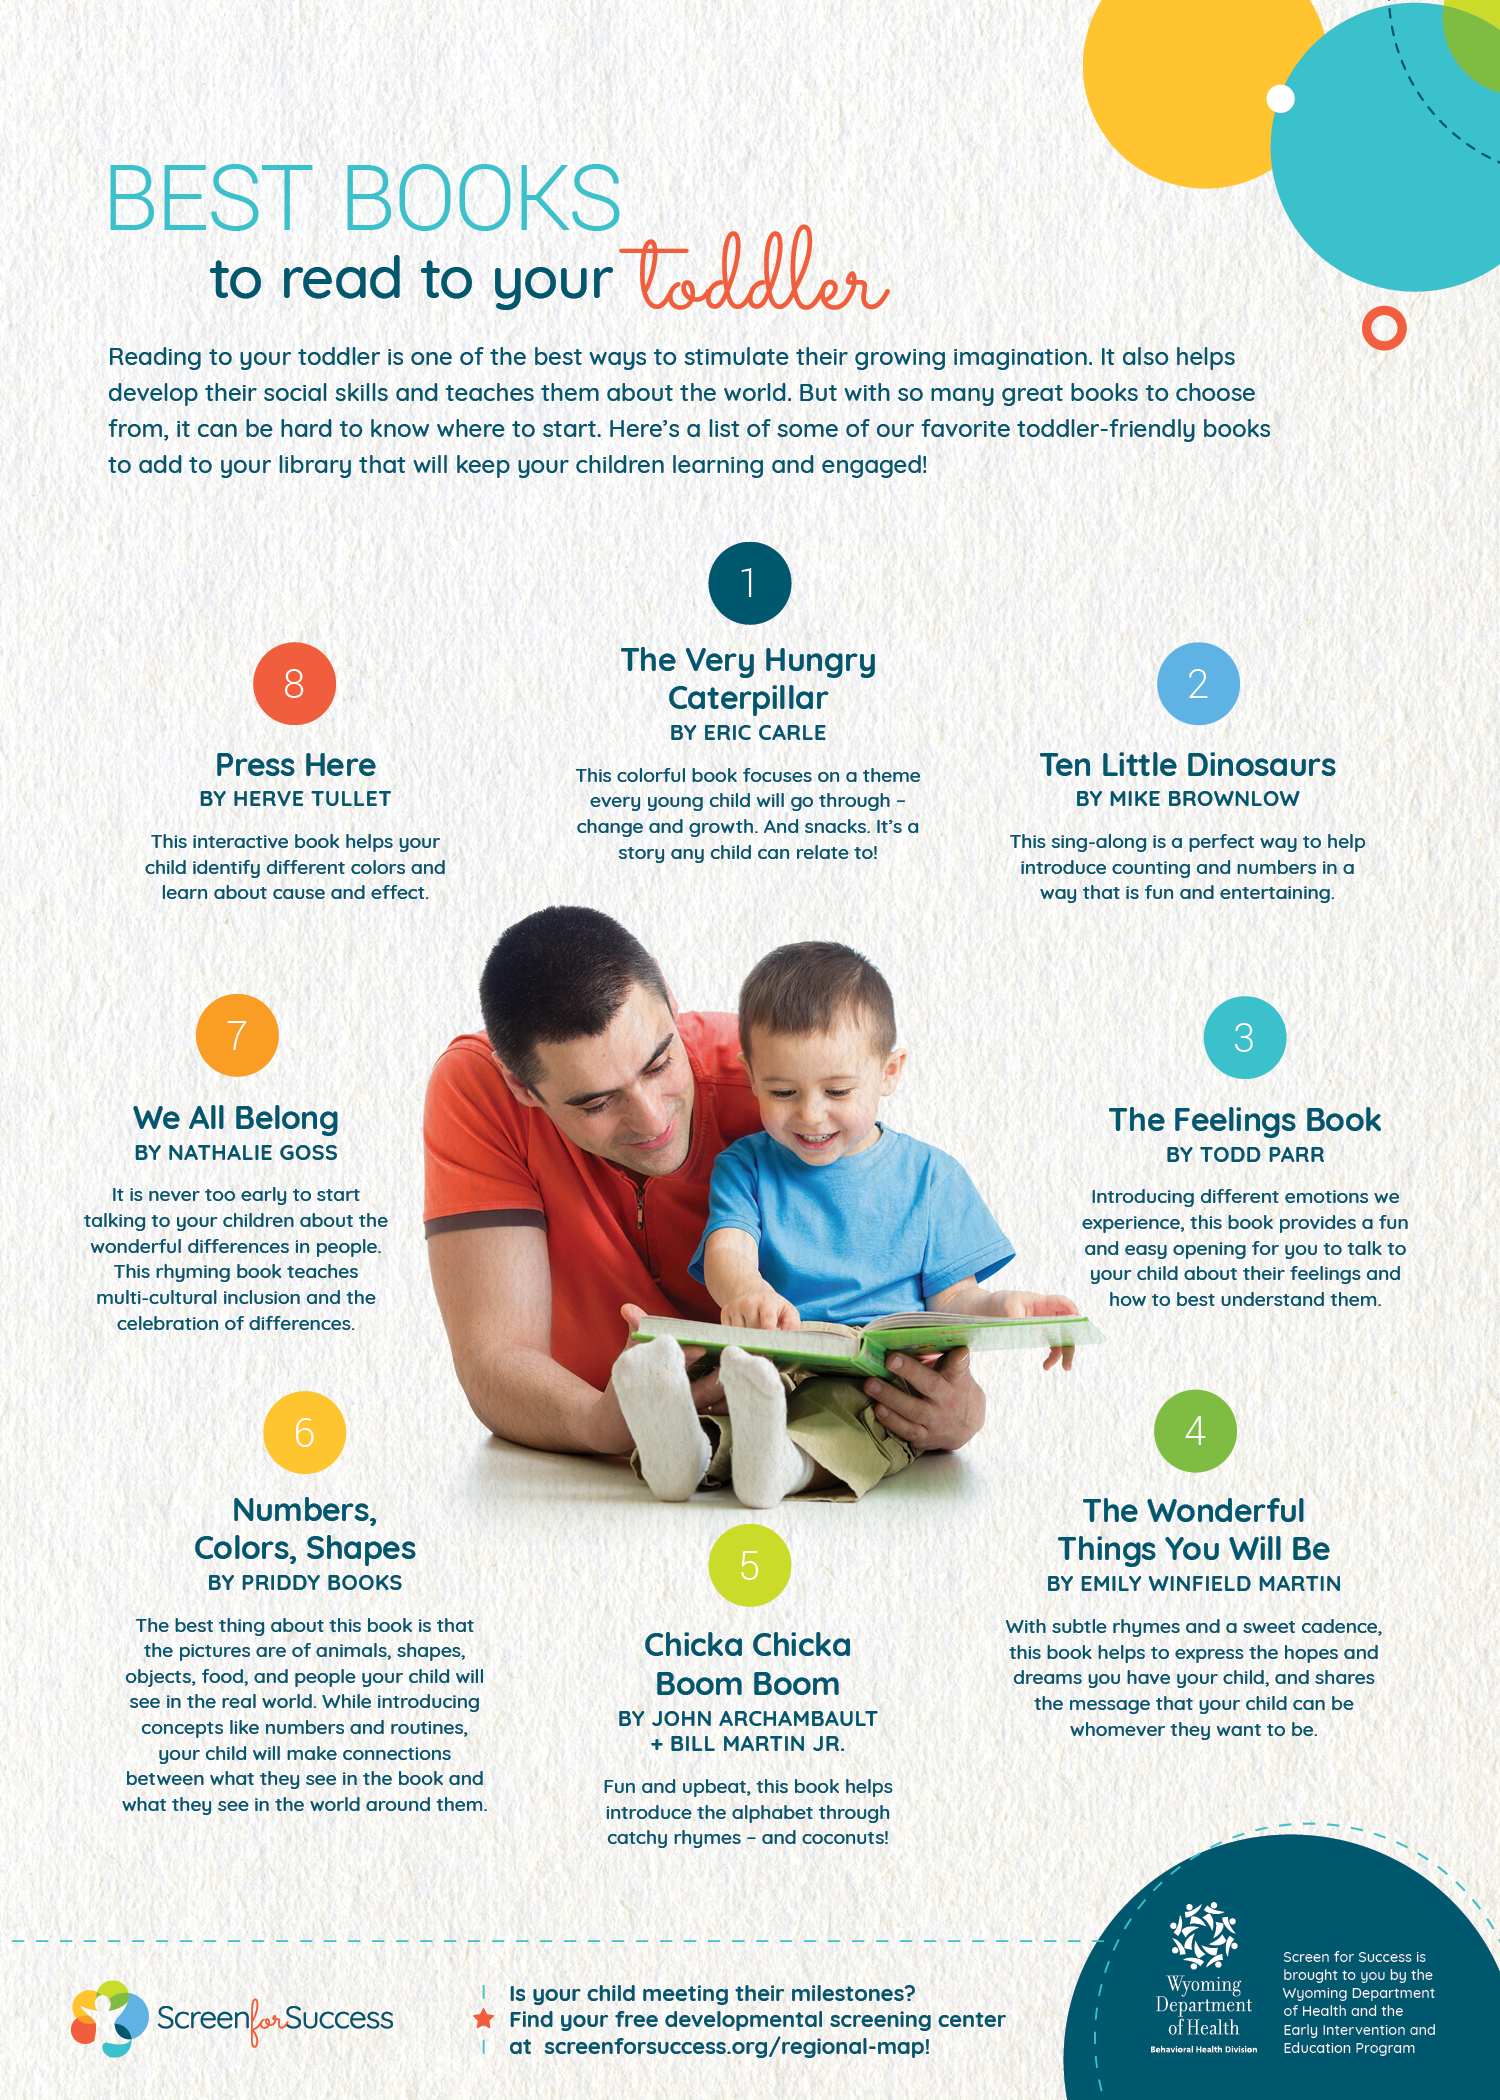 Best Books to Read to Your Toddler